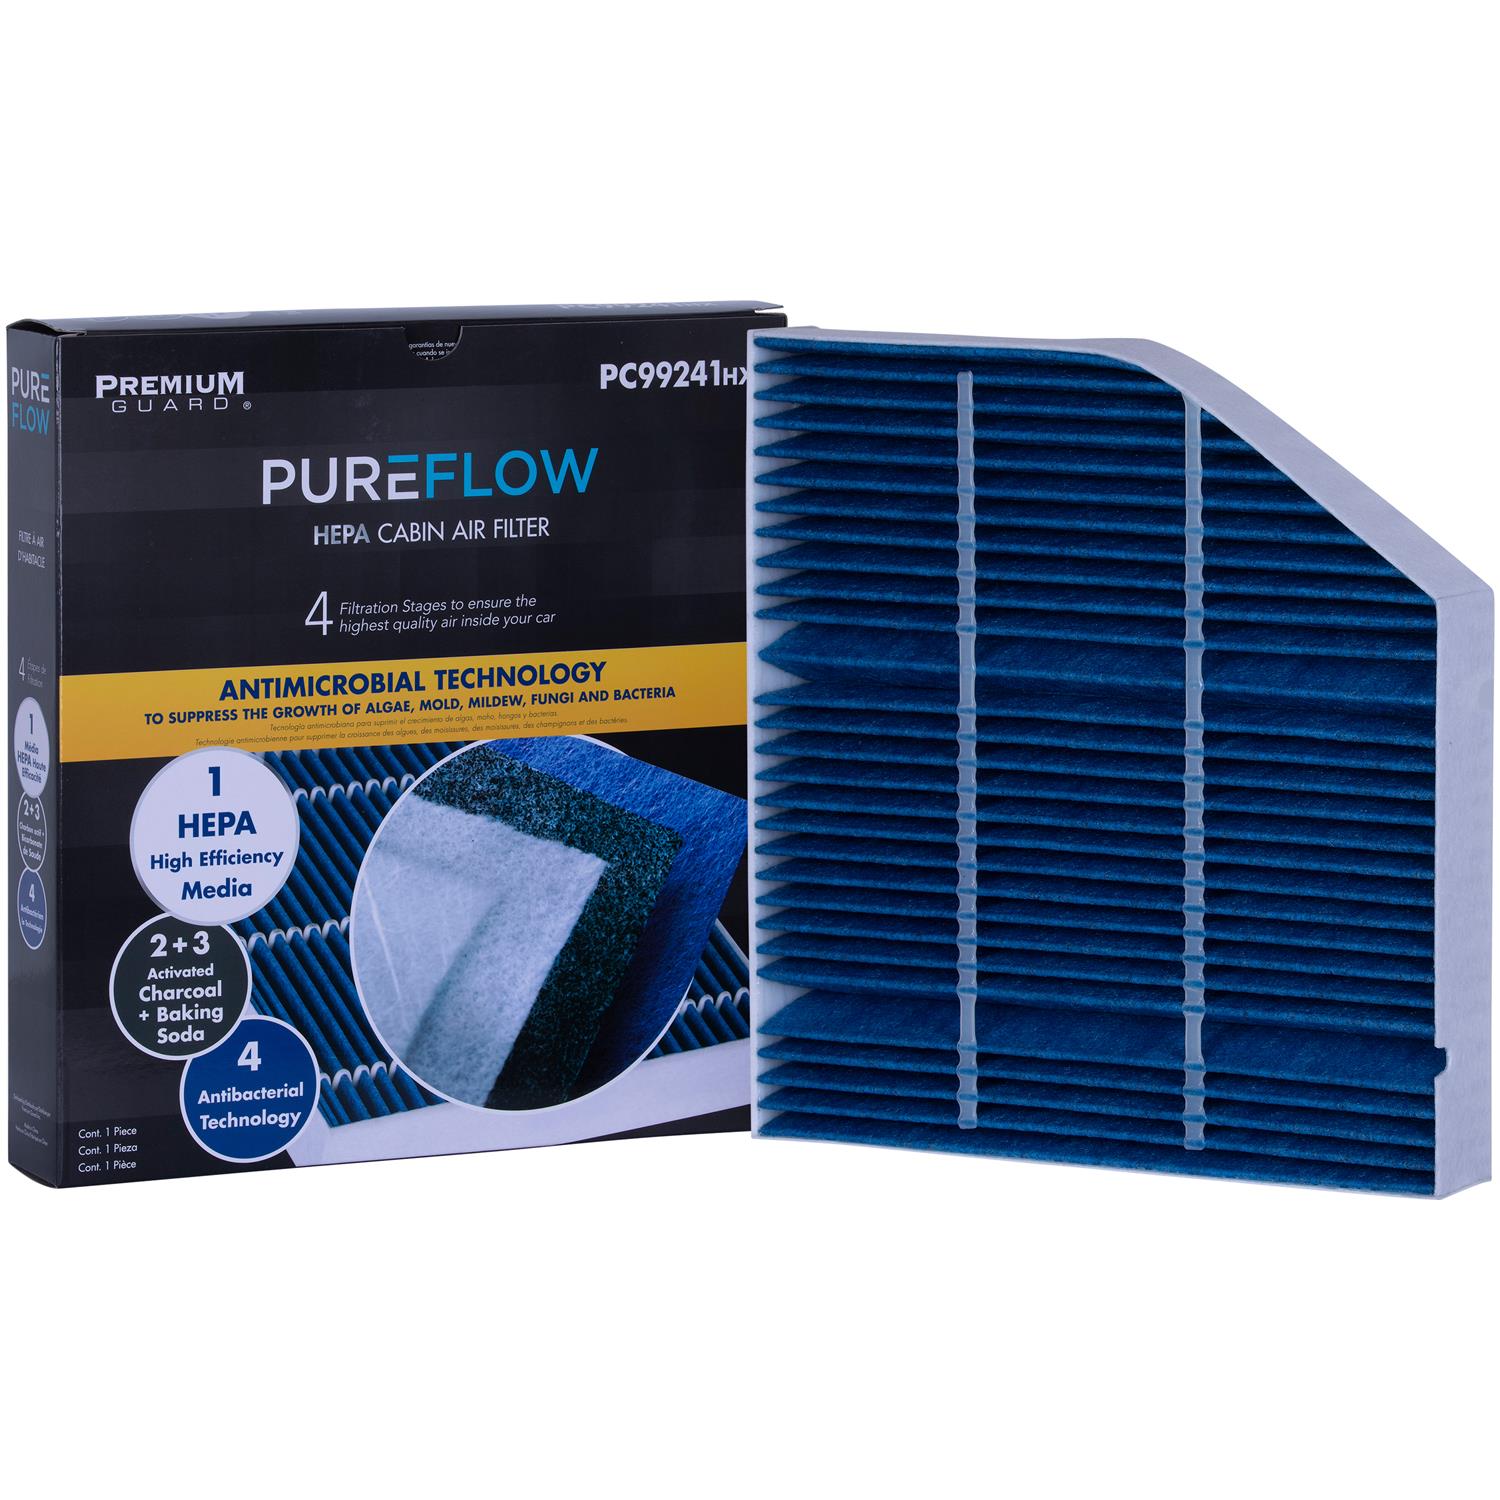 PUREFLOW 2019 Mercedes-Benz C63 AMG Cabin Air Filter with HEPA and Antibacterial Technology, PC99241HX